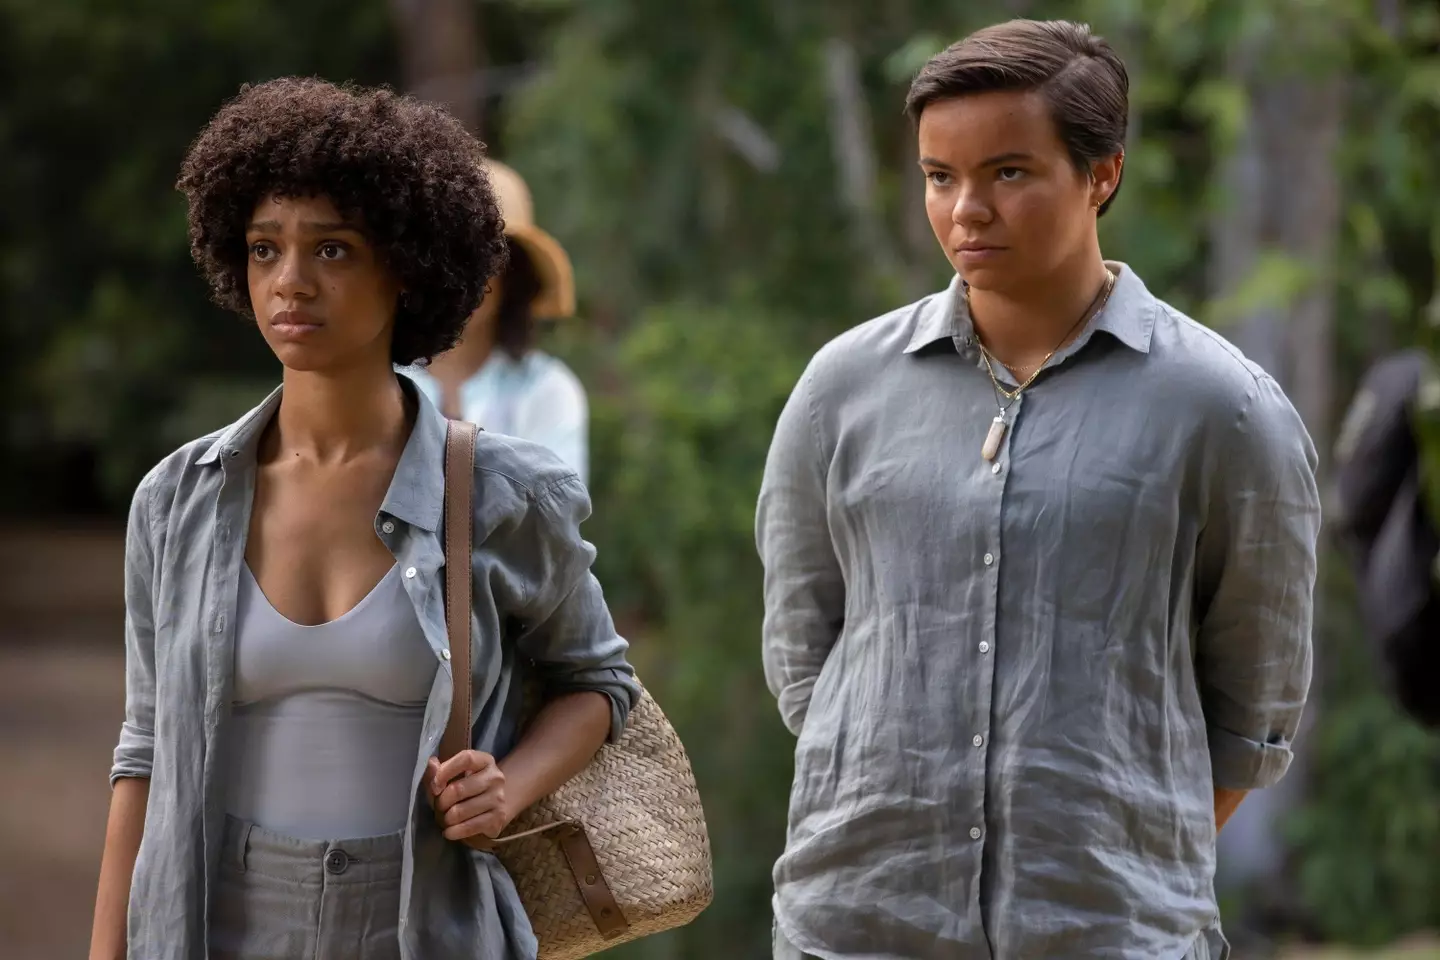 Zoe Terakes (R) will appear in MCU later this year.